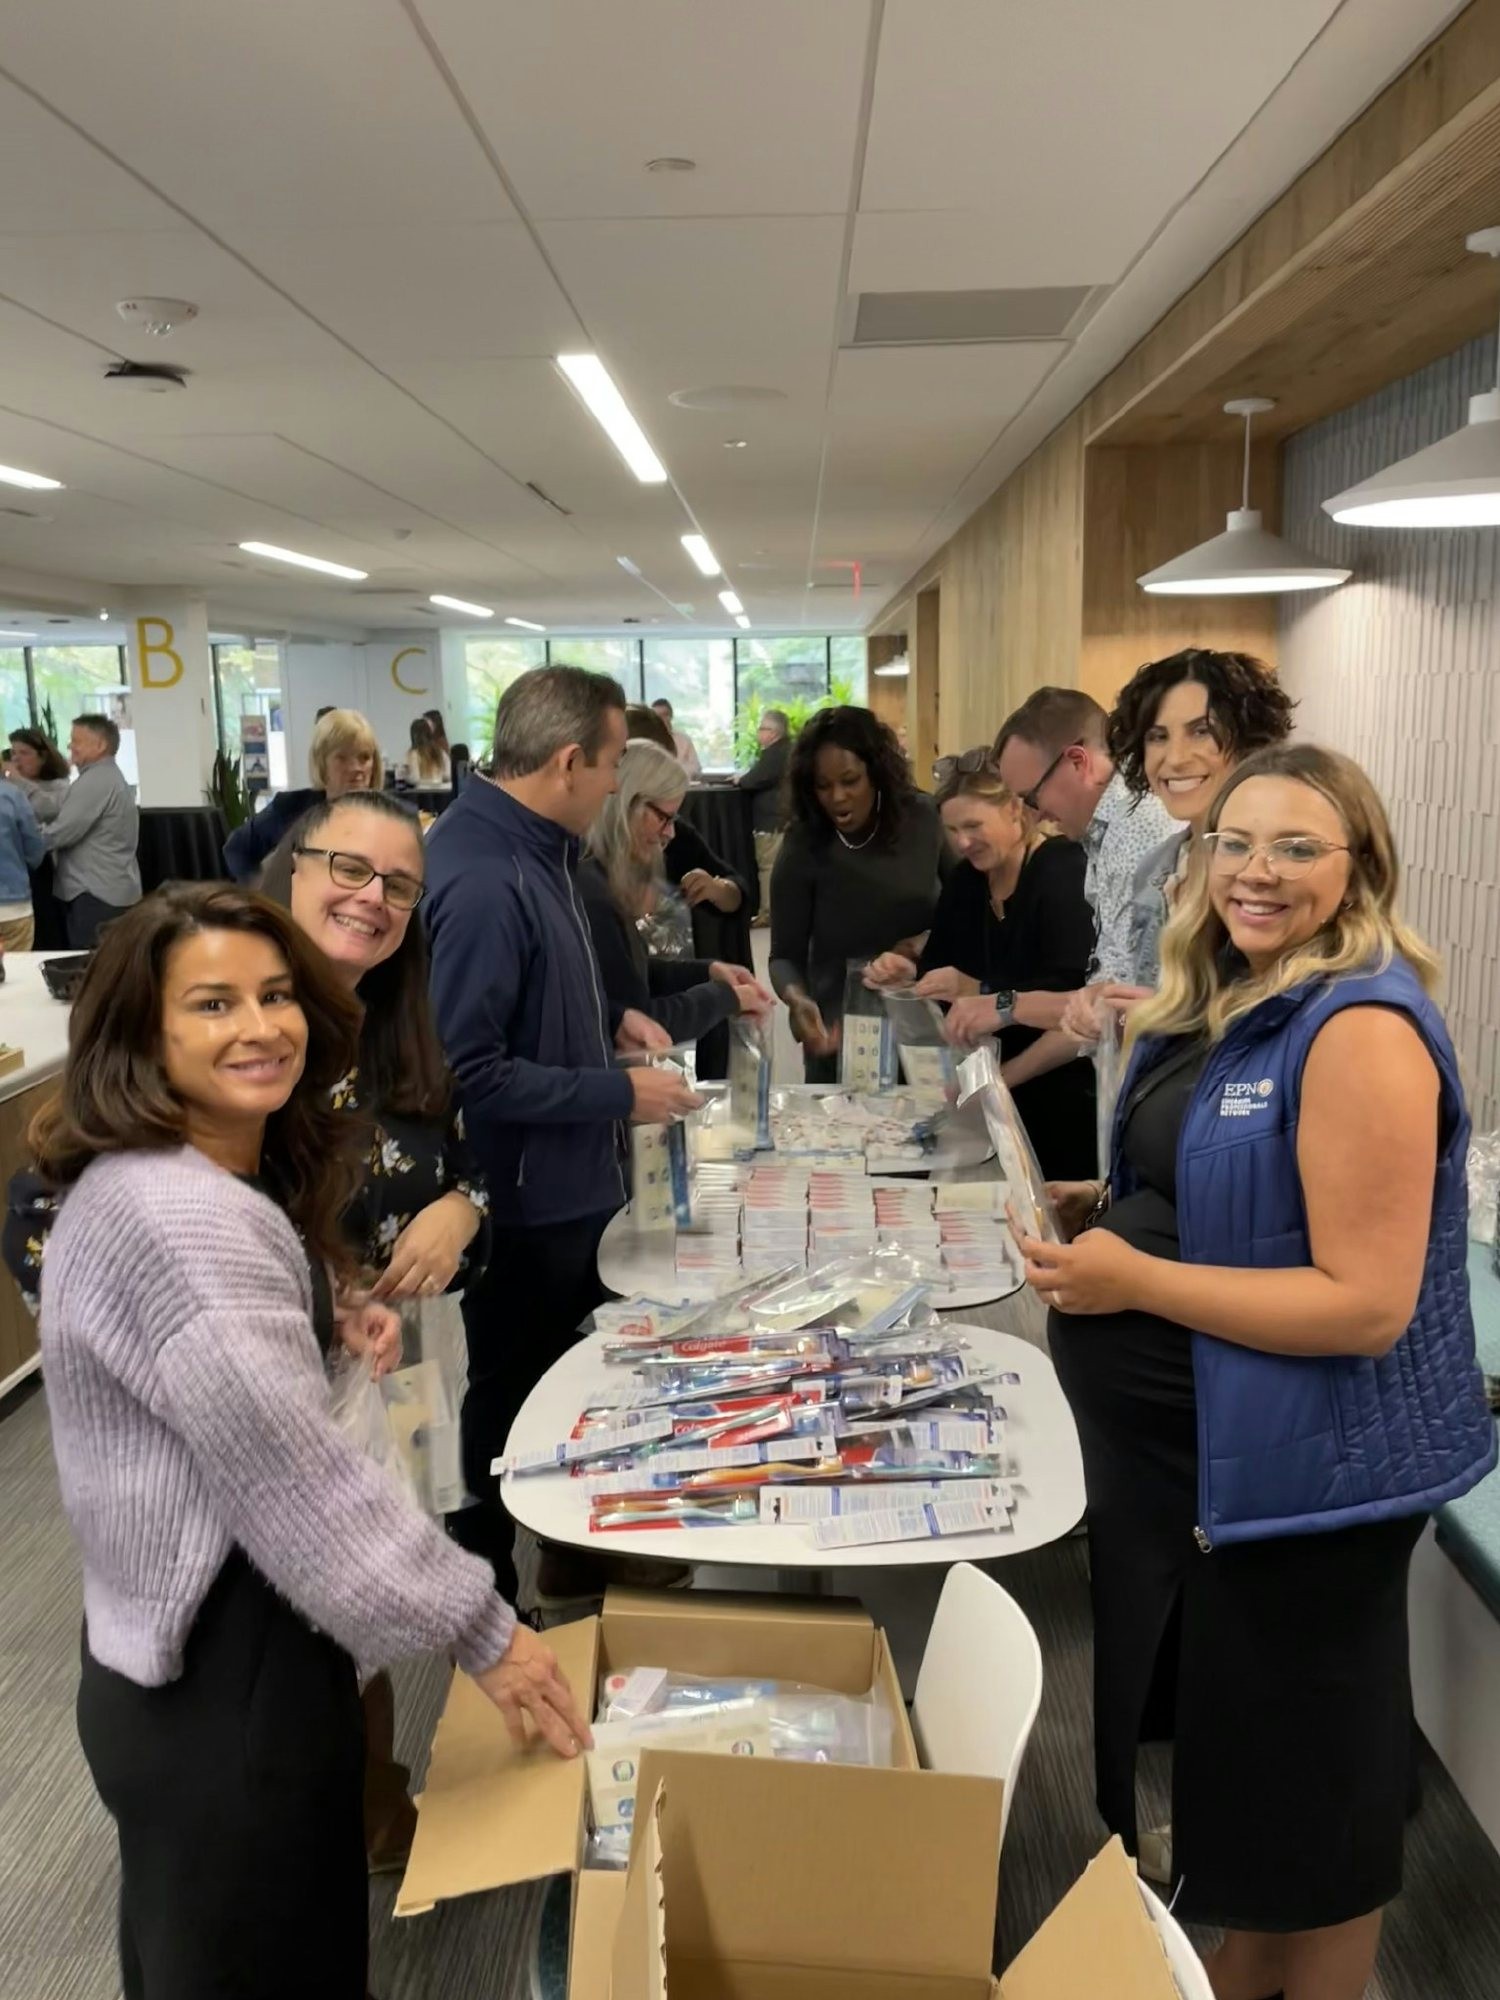 Members of our Emerging Professionals Network hosted a networking event assembling oral health kits.